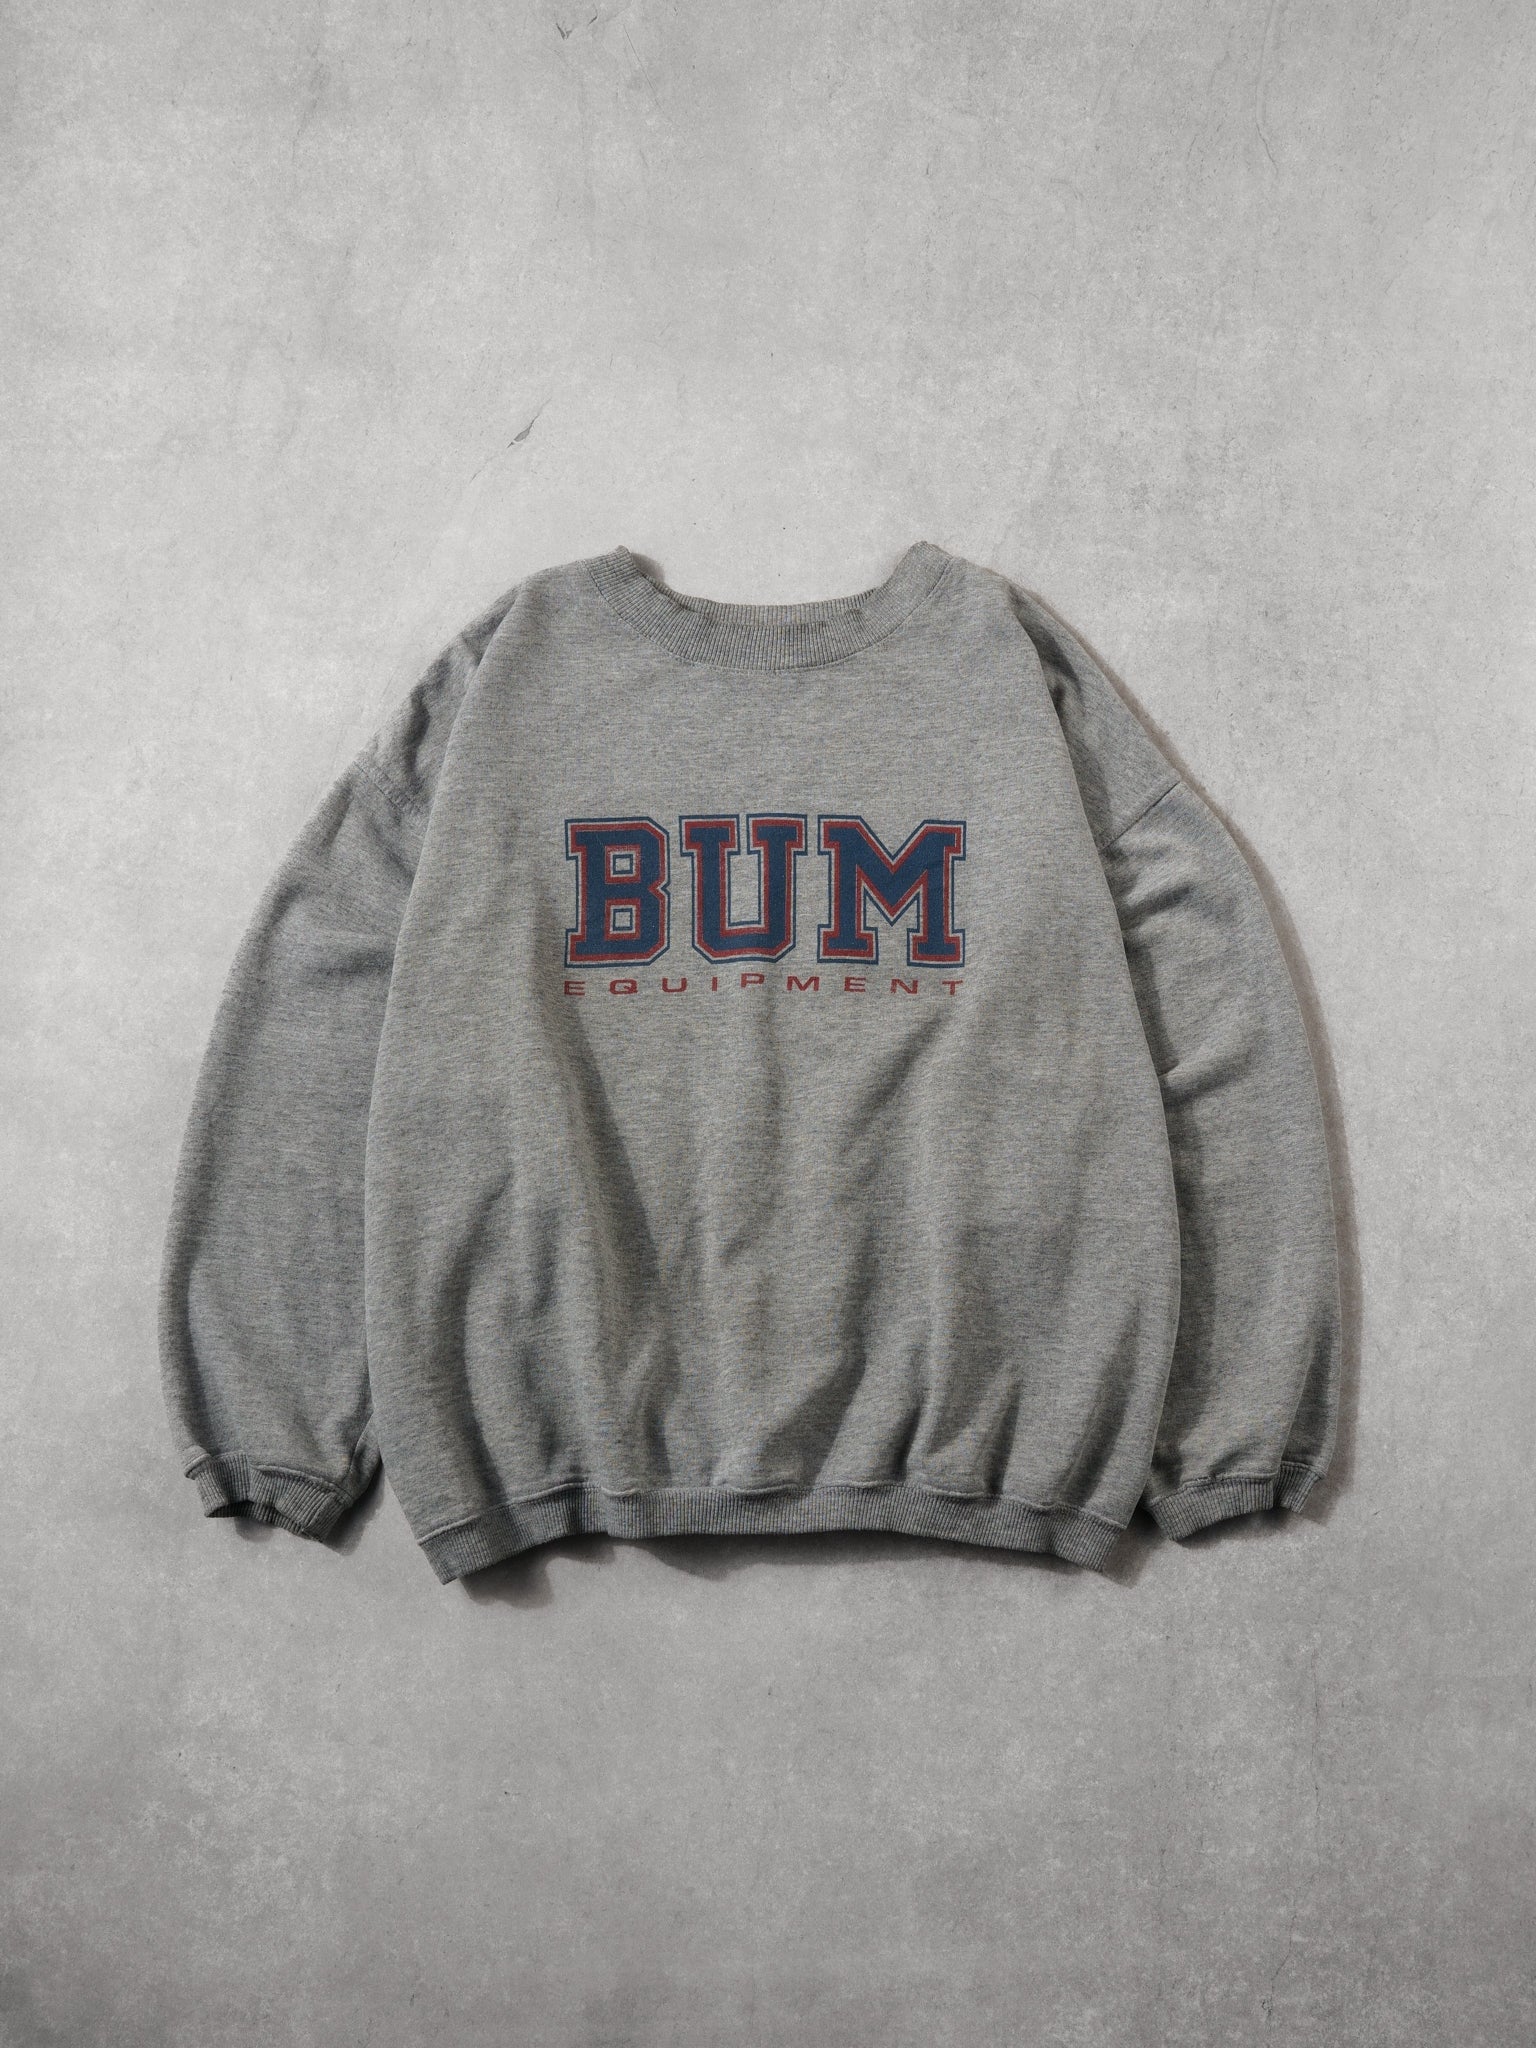 Vintage 90s Grey Red and Blue BUM Equipment Crewneck (L)